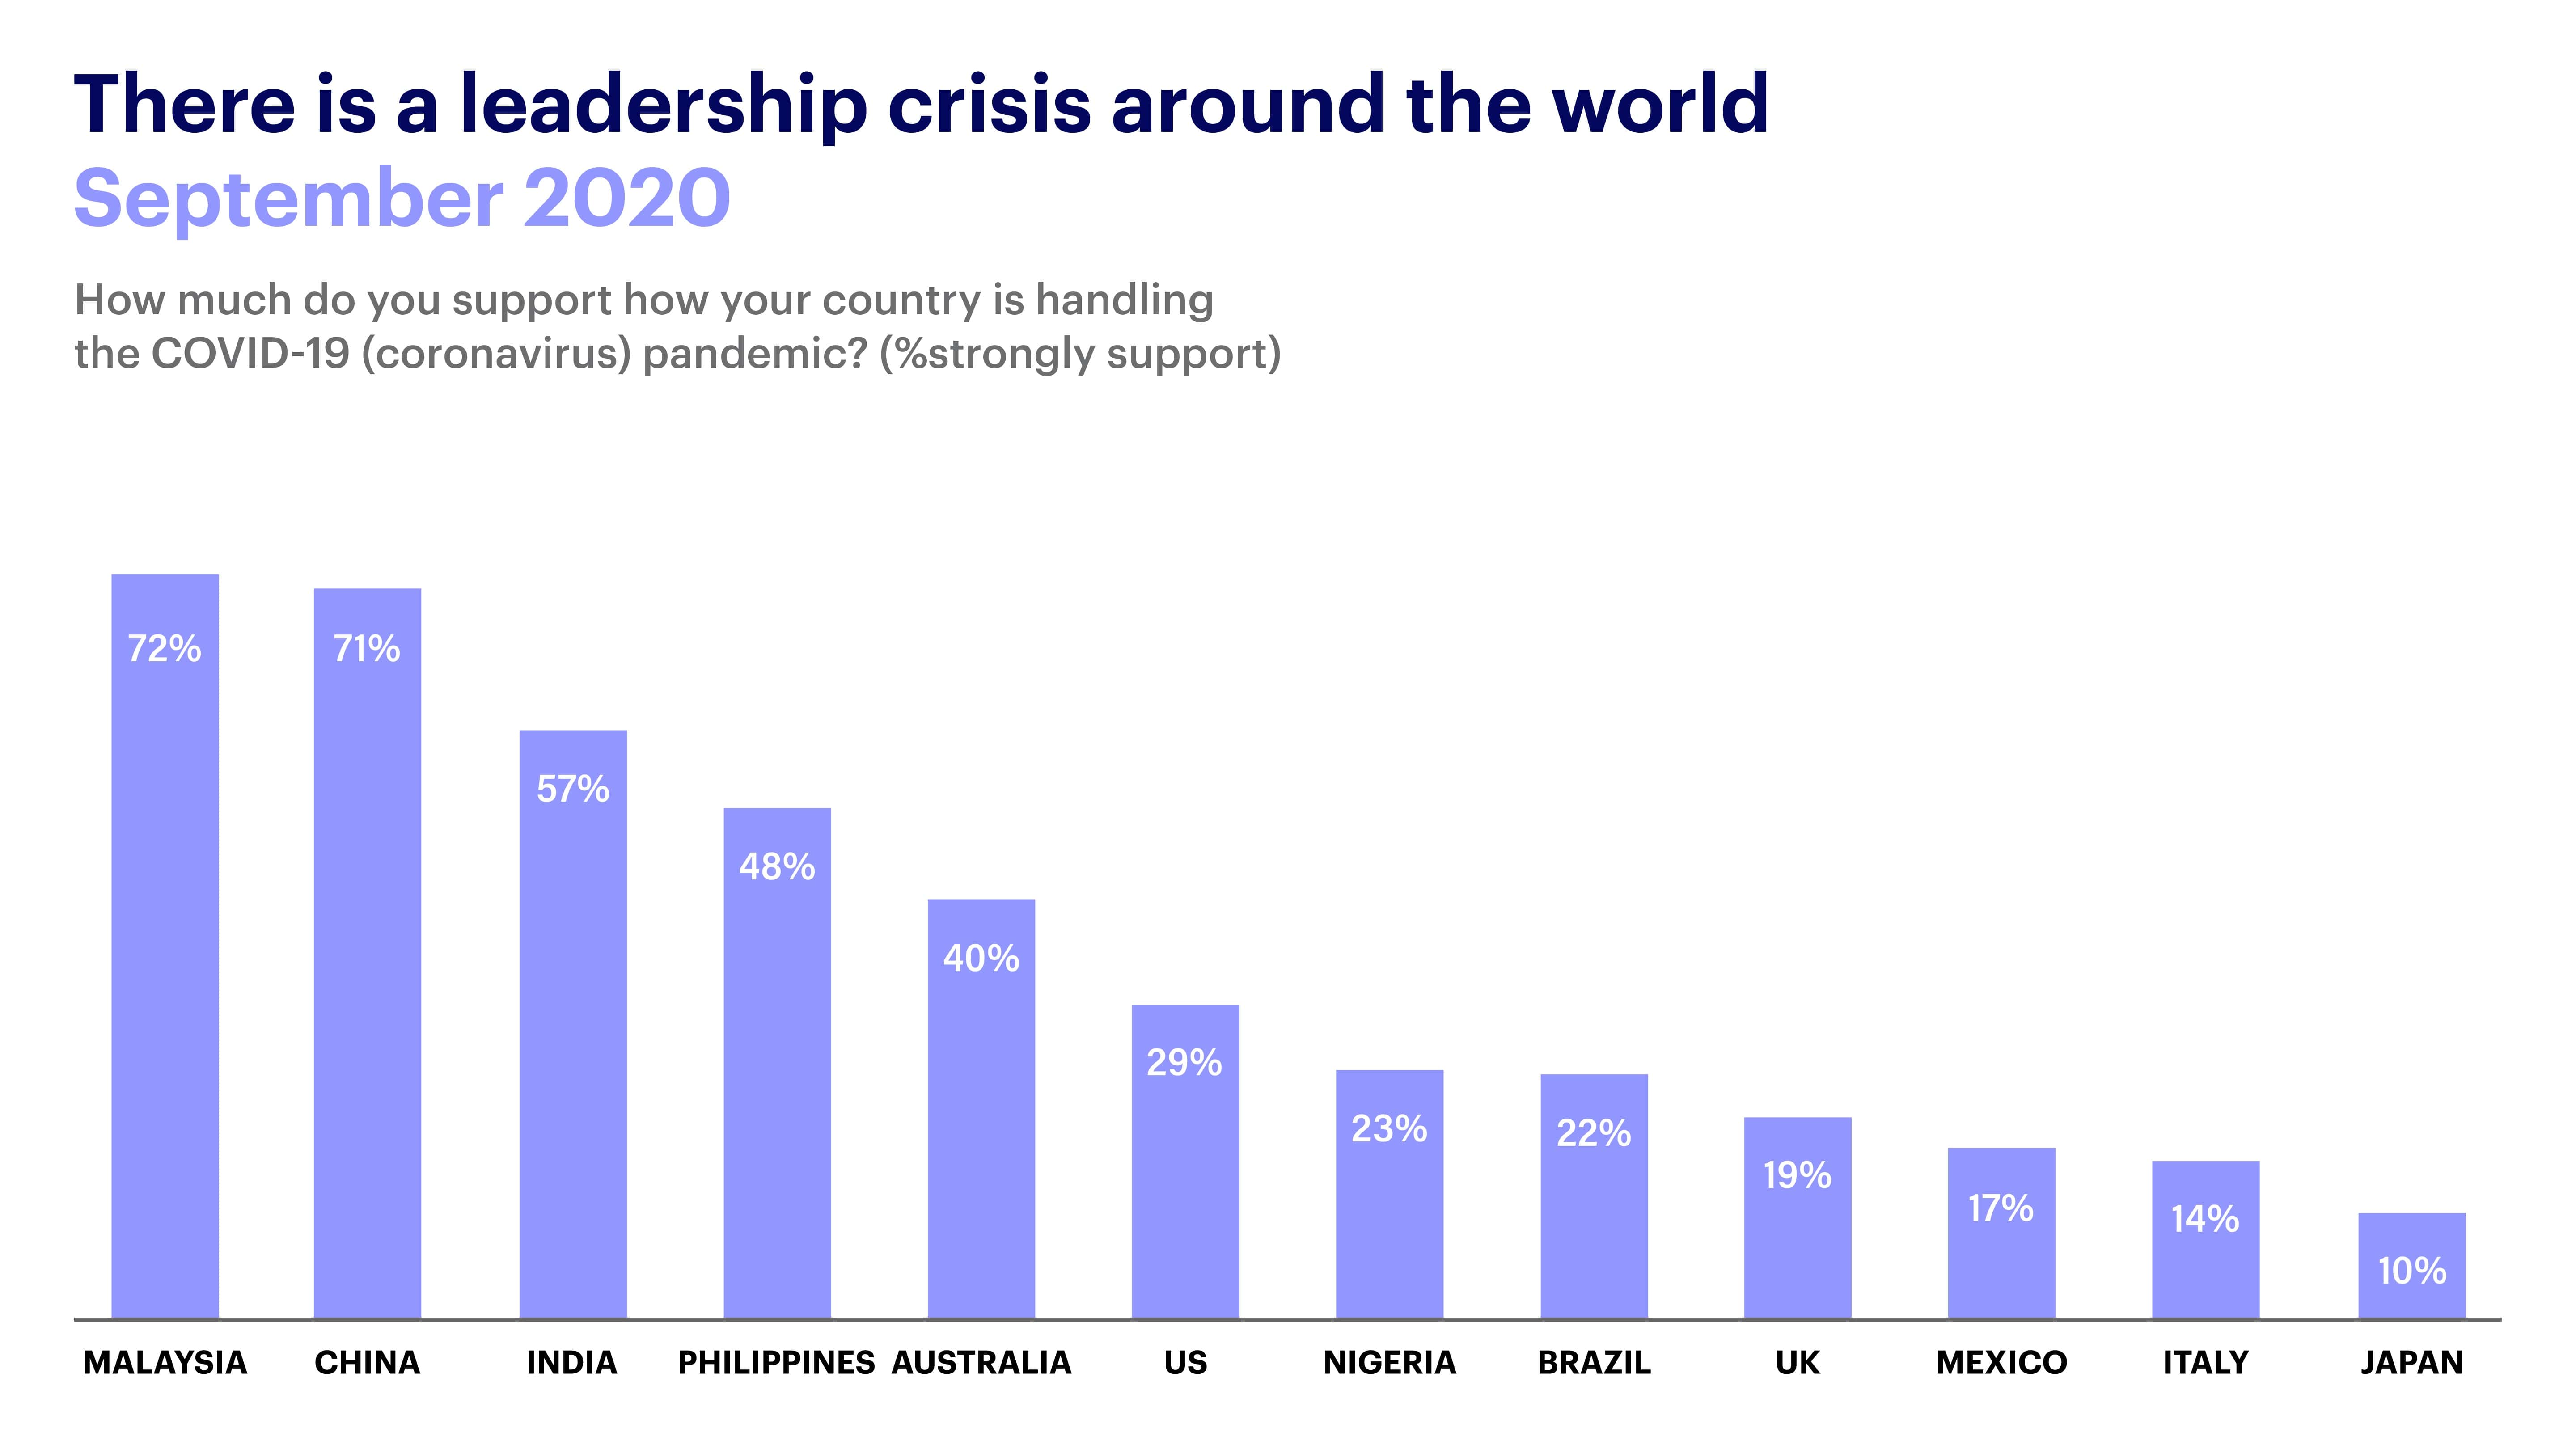 Bar graphic showing the leadership crisis around the world during COVID-19